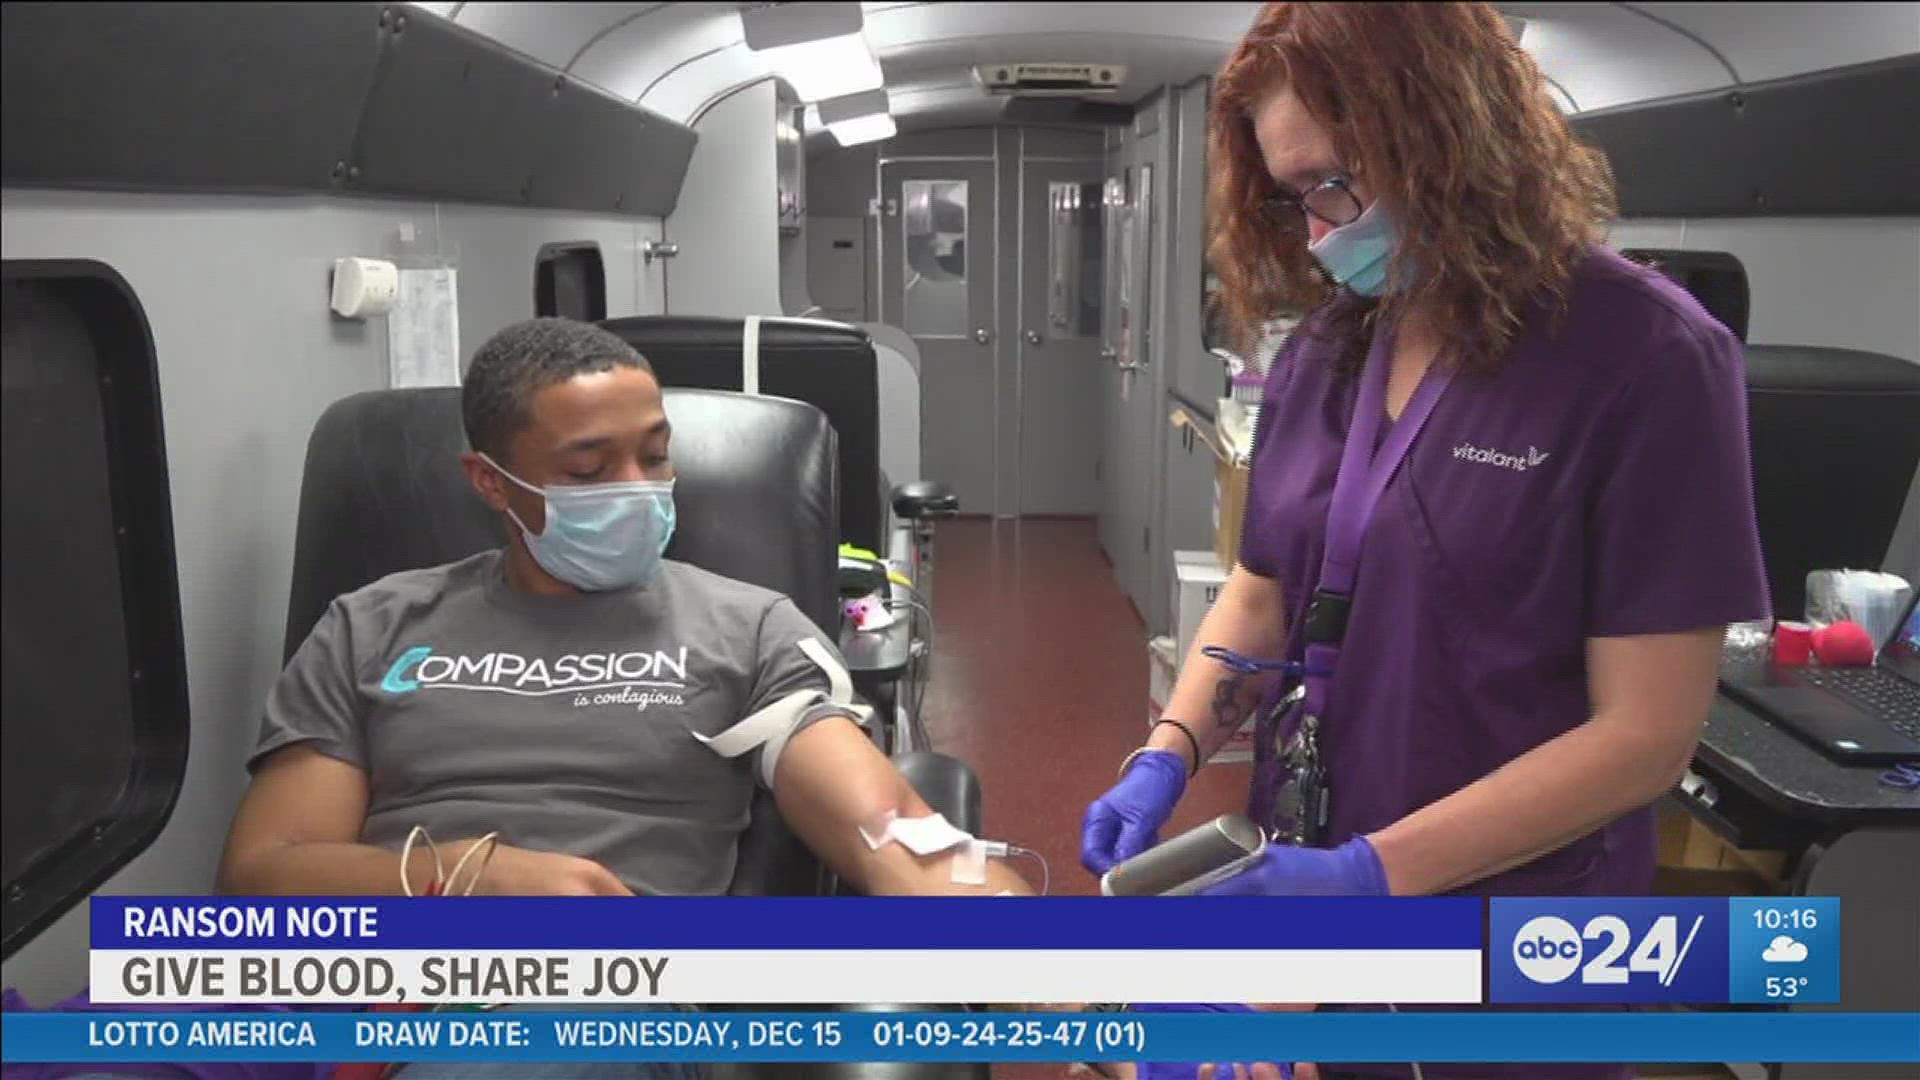 ABC24 Anchor Richard Ransom discusses in his Ransom Note about the end of ABC24's "Give Blood, Share Joy" campaign.